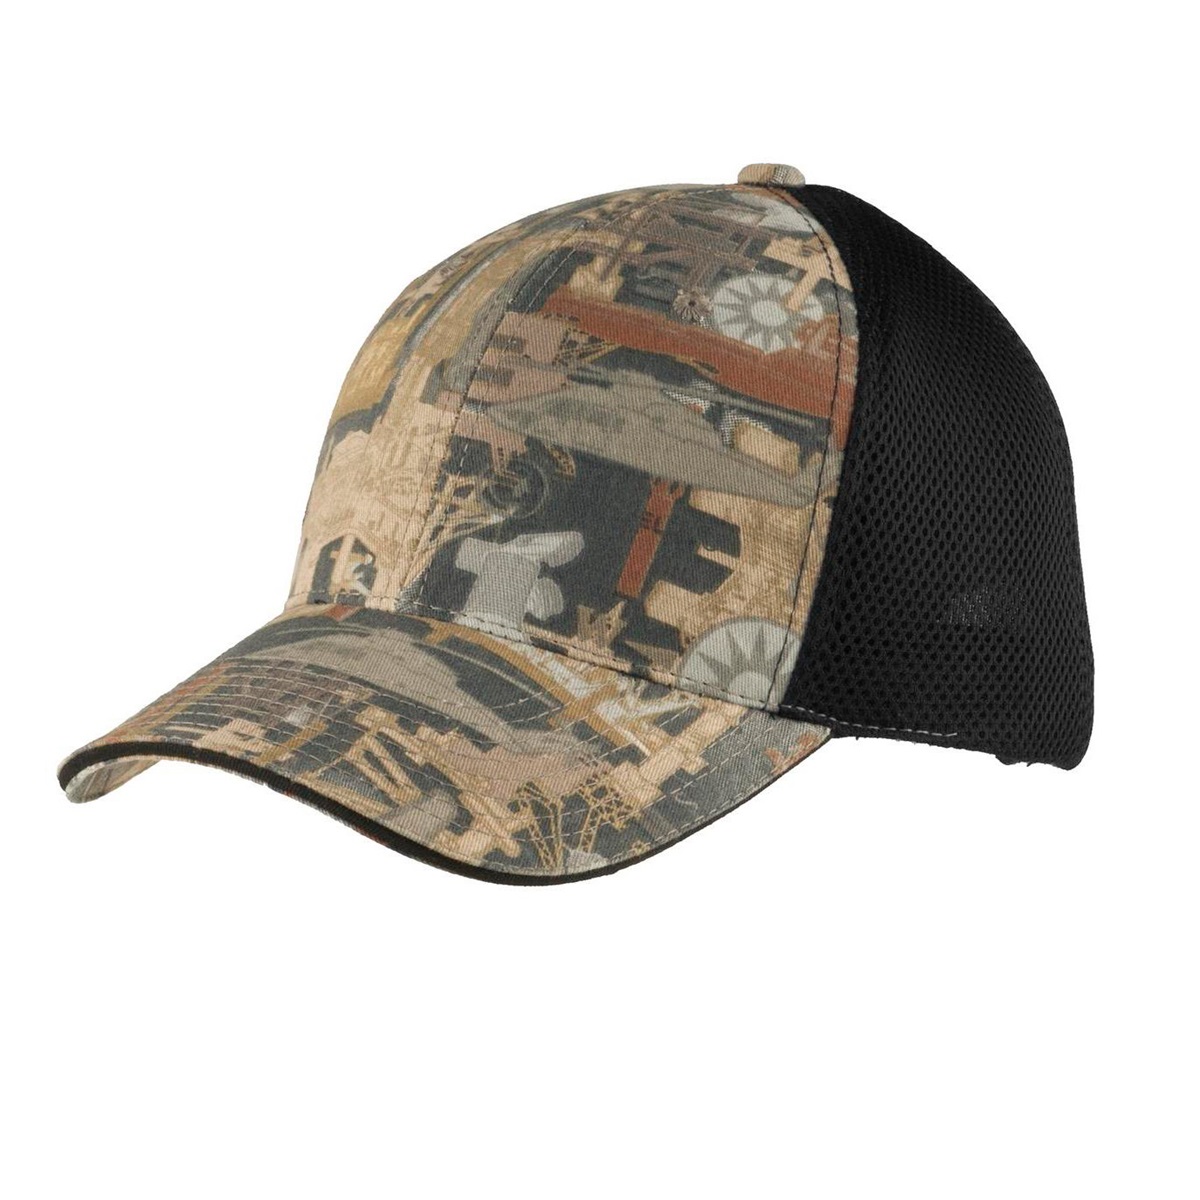 Port Authority C912 Camouflage Cap with Air Mesh Back - Oilfield Camo ...